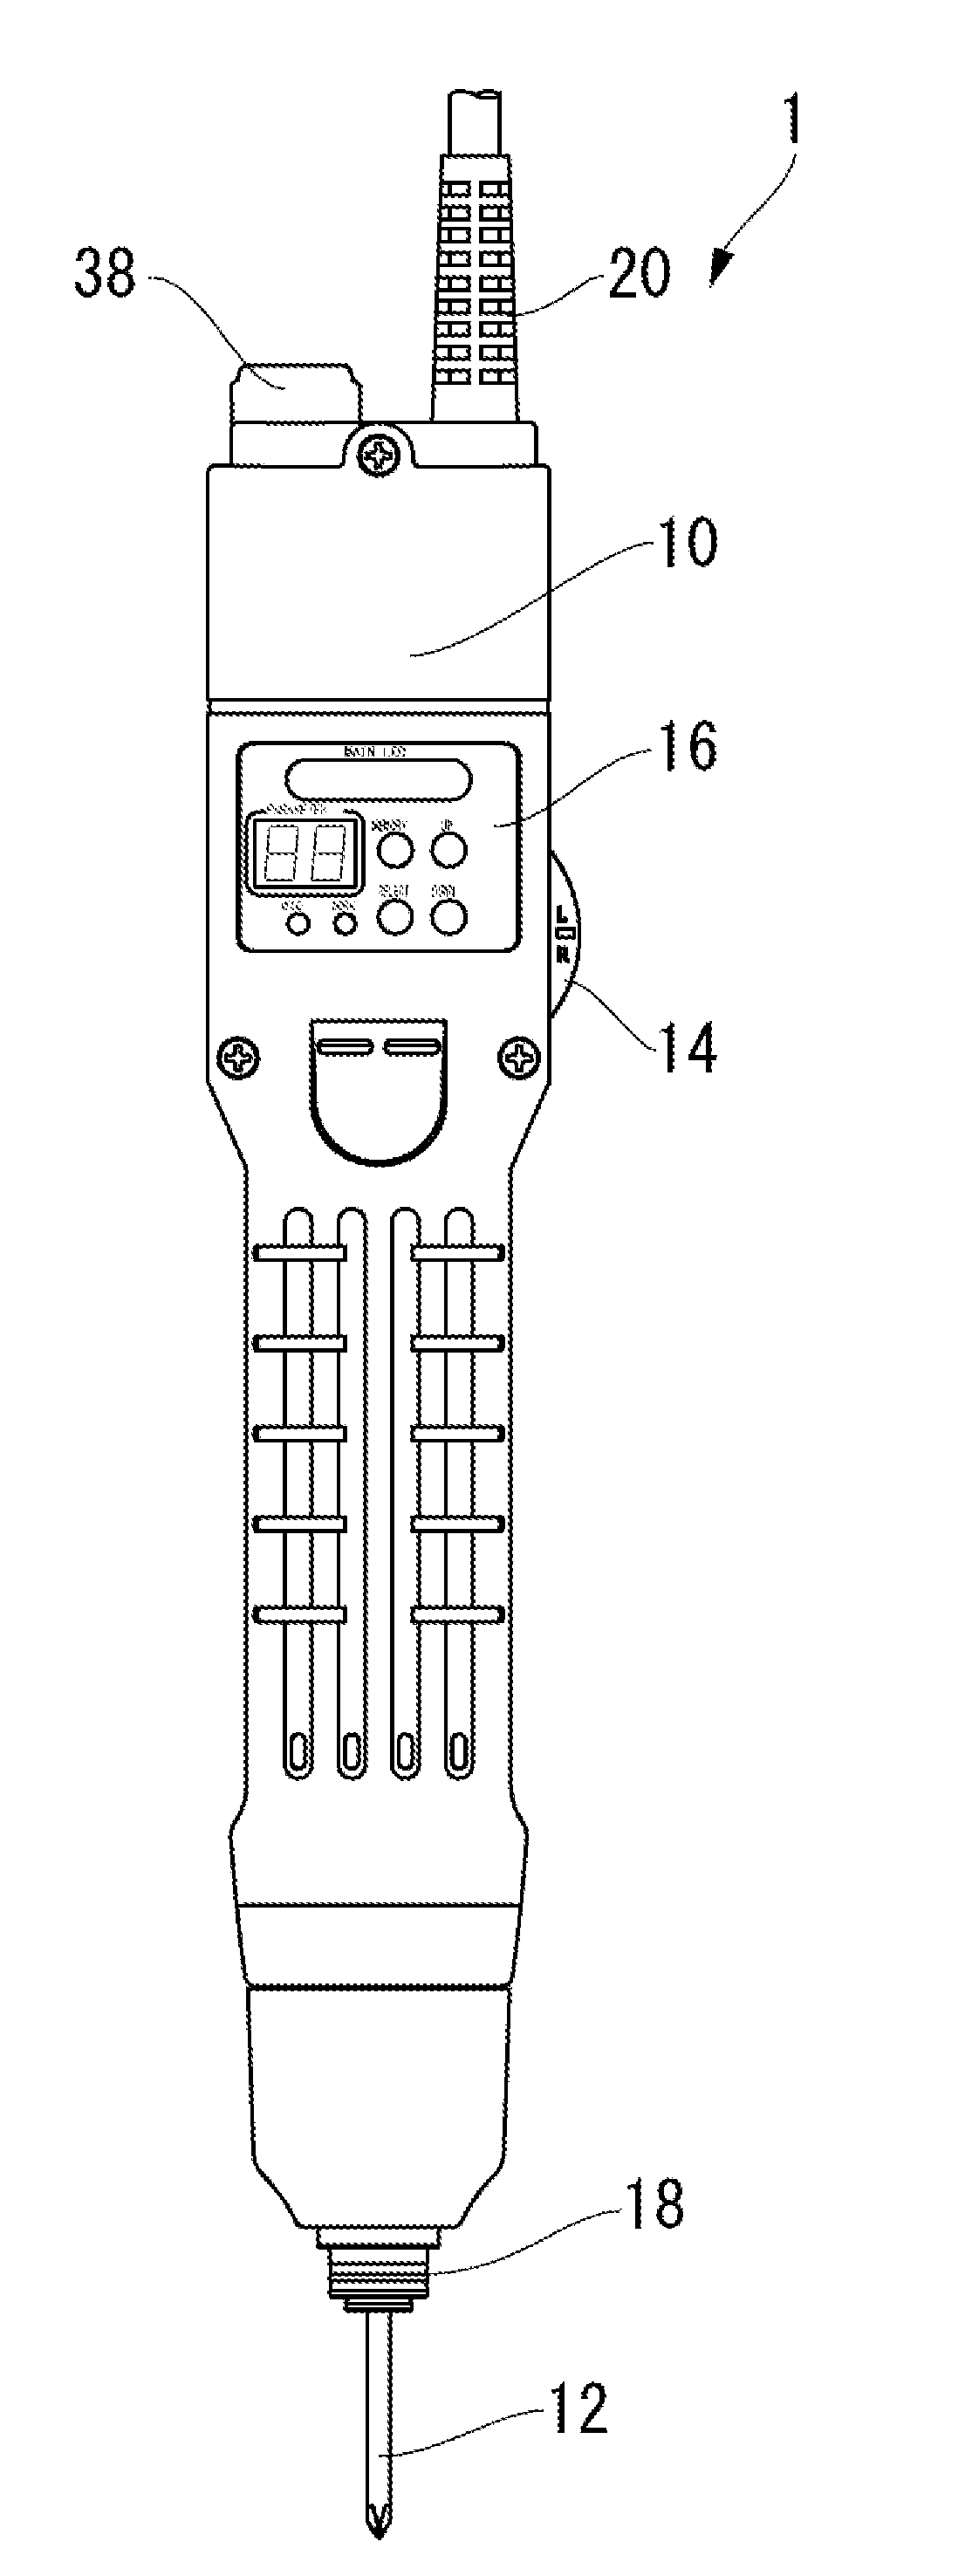 Threaded member tightening tool and counting apparatus